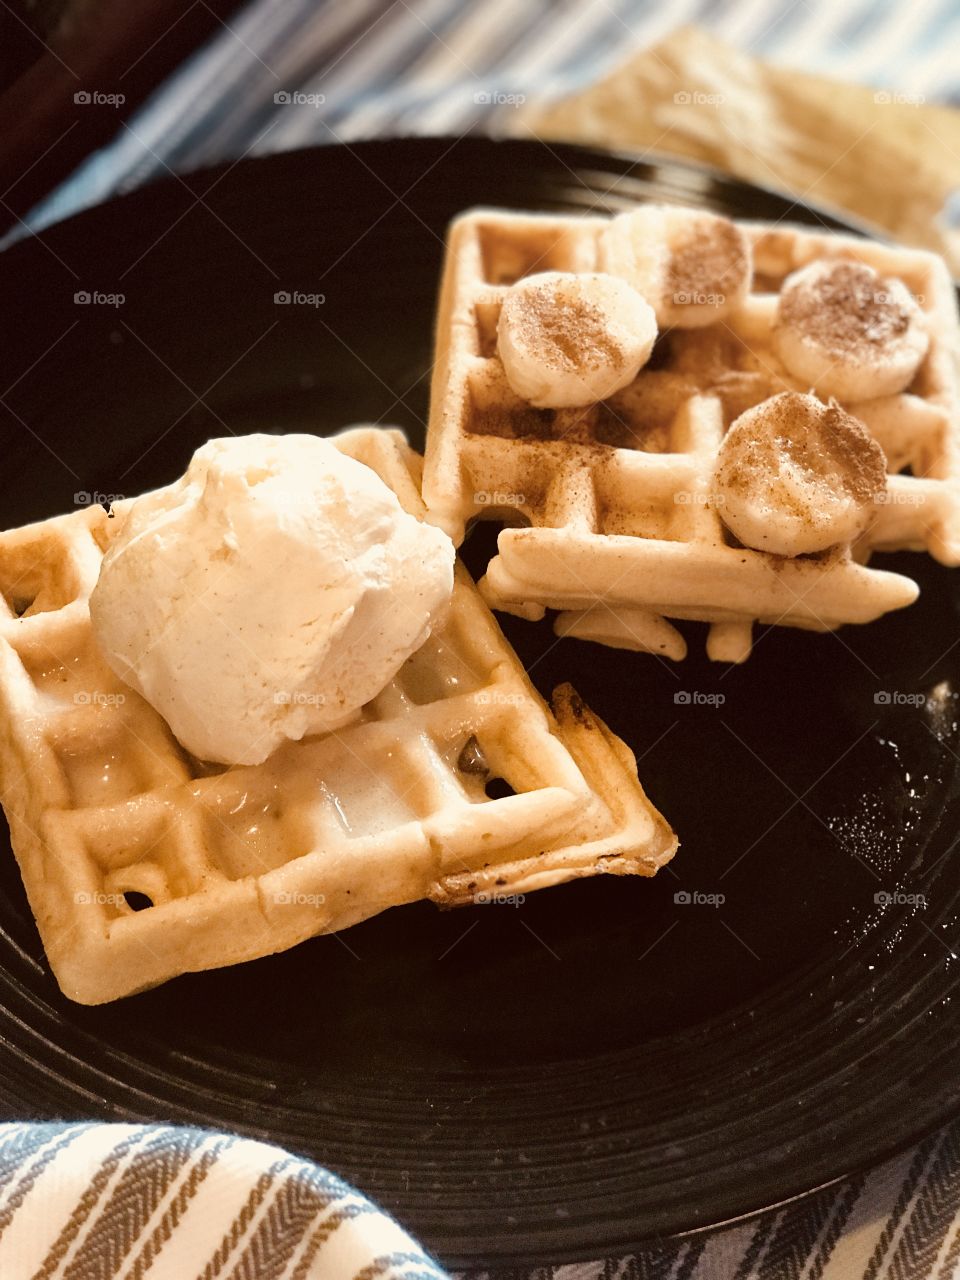 A delicious breakfast of waffles with bananas and vanilla ice cream and cinnamon on top. USA, America 